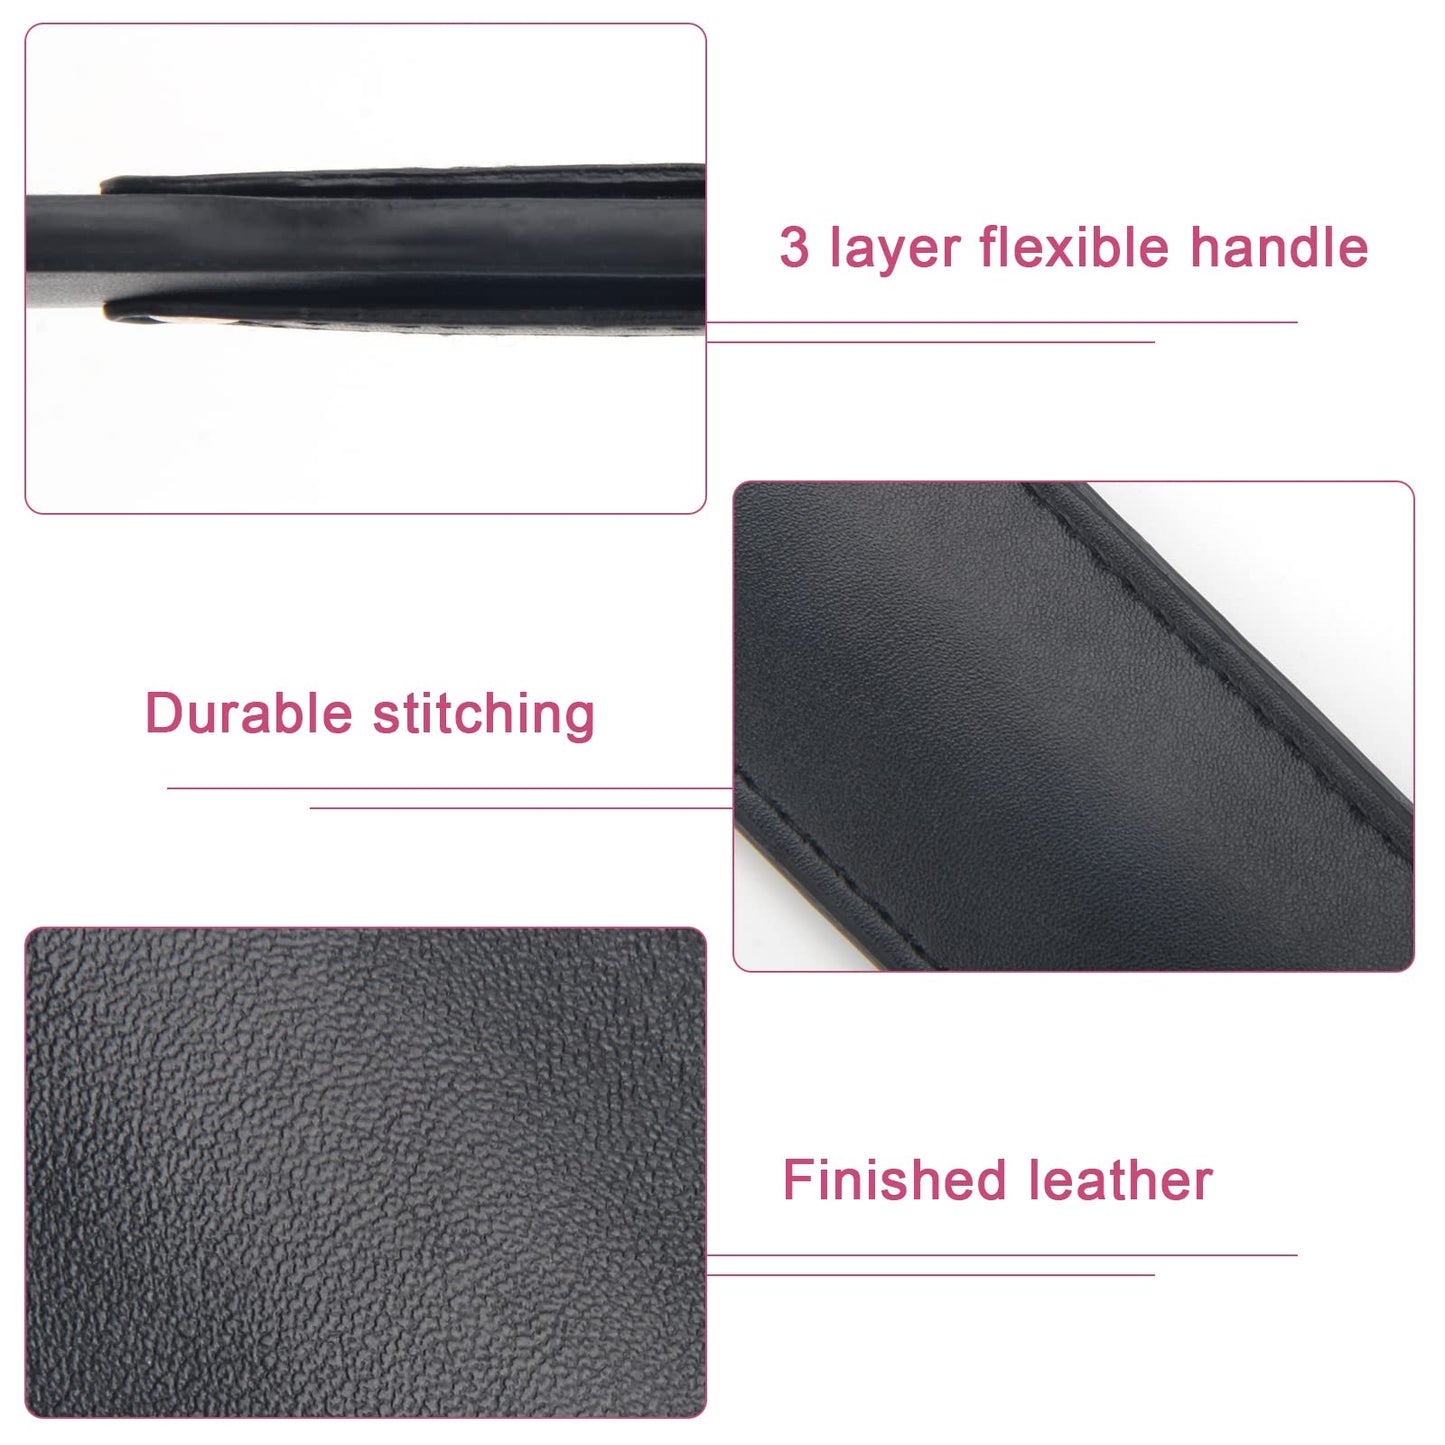 Zhaoyao 2022 Newest Faux Leather Paddle 17.2 Inch Premium Quality Riding Crop for Horses,Light Weight Rug Paddles,Super Durable Equestrianism Crops